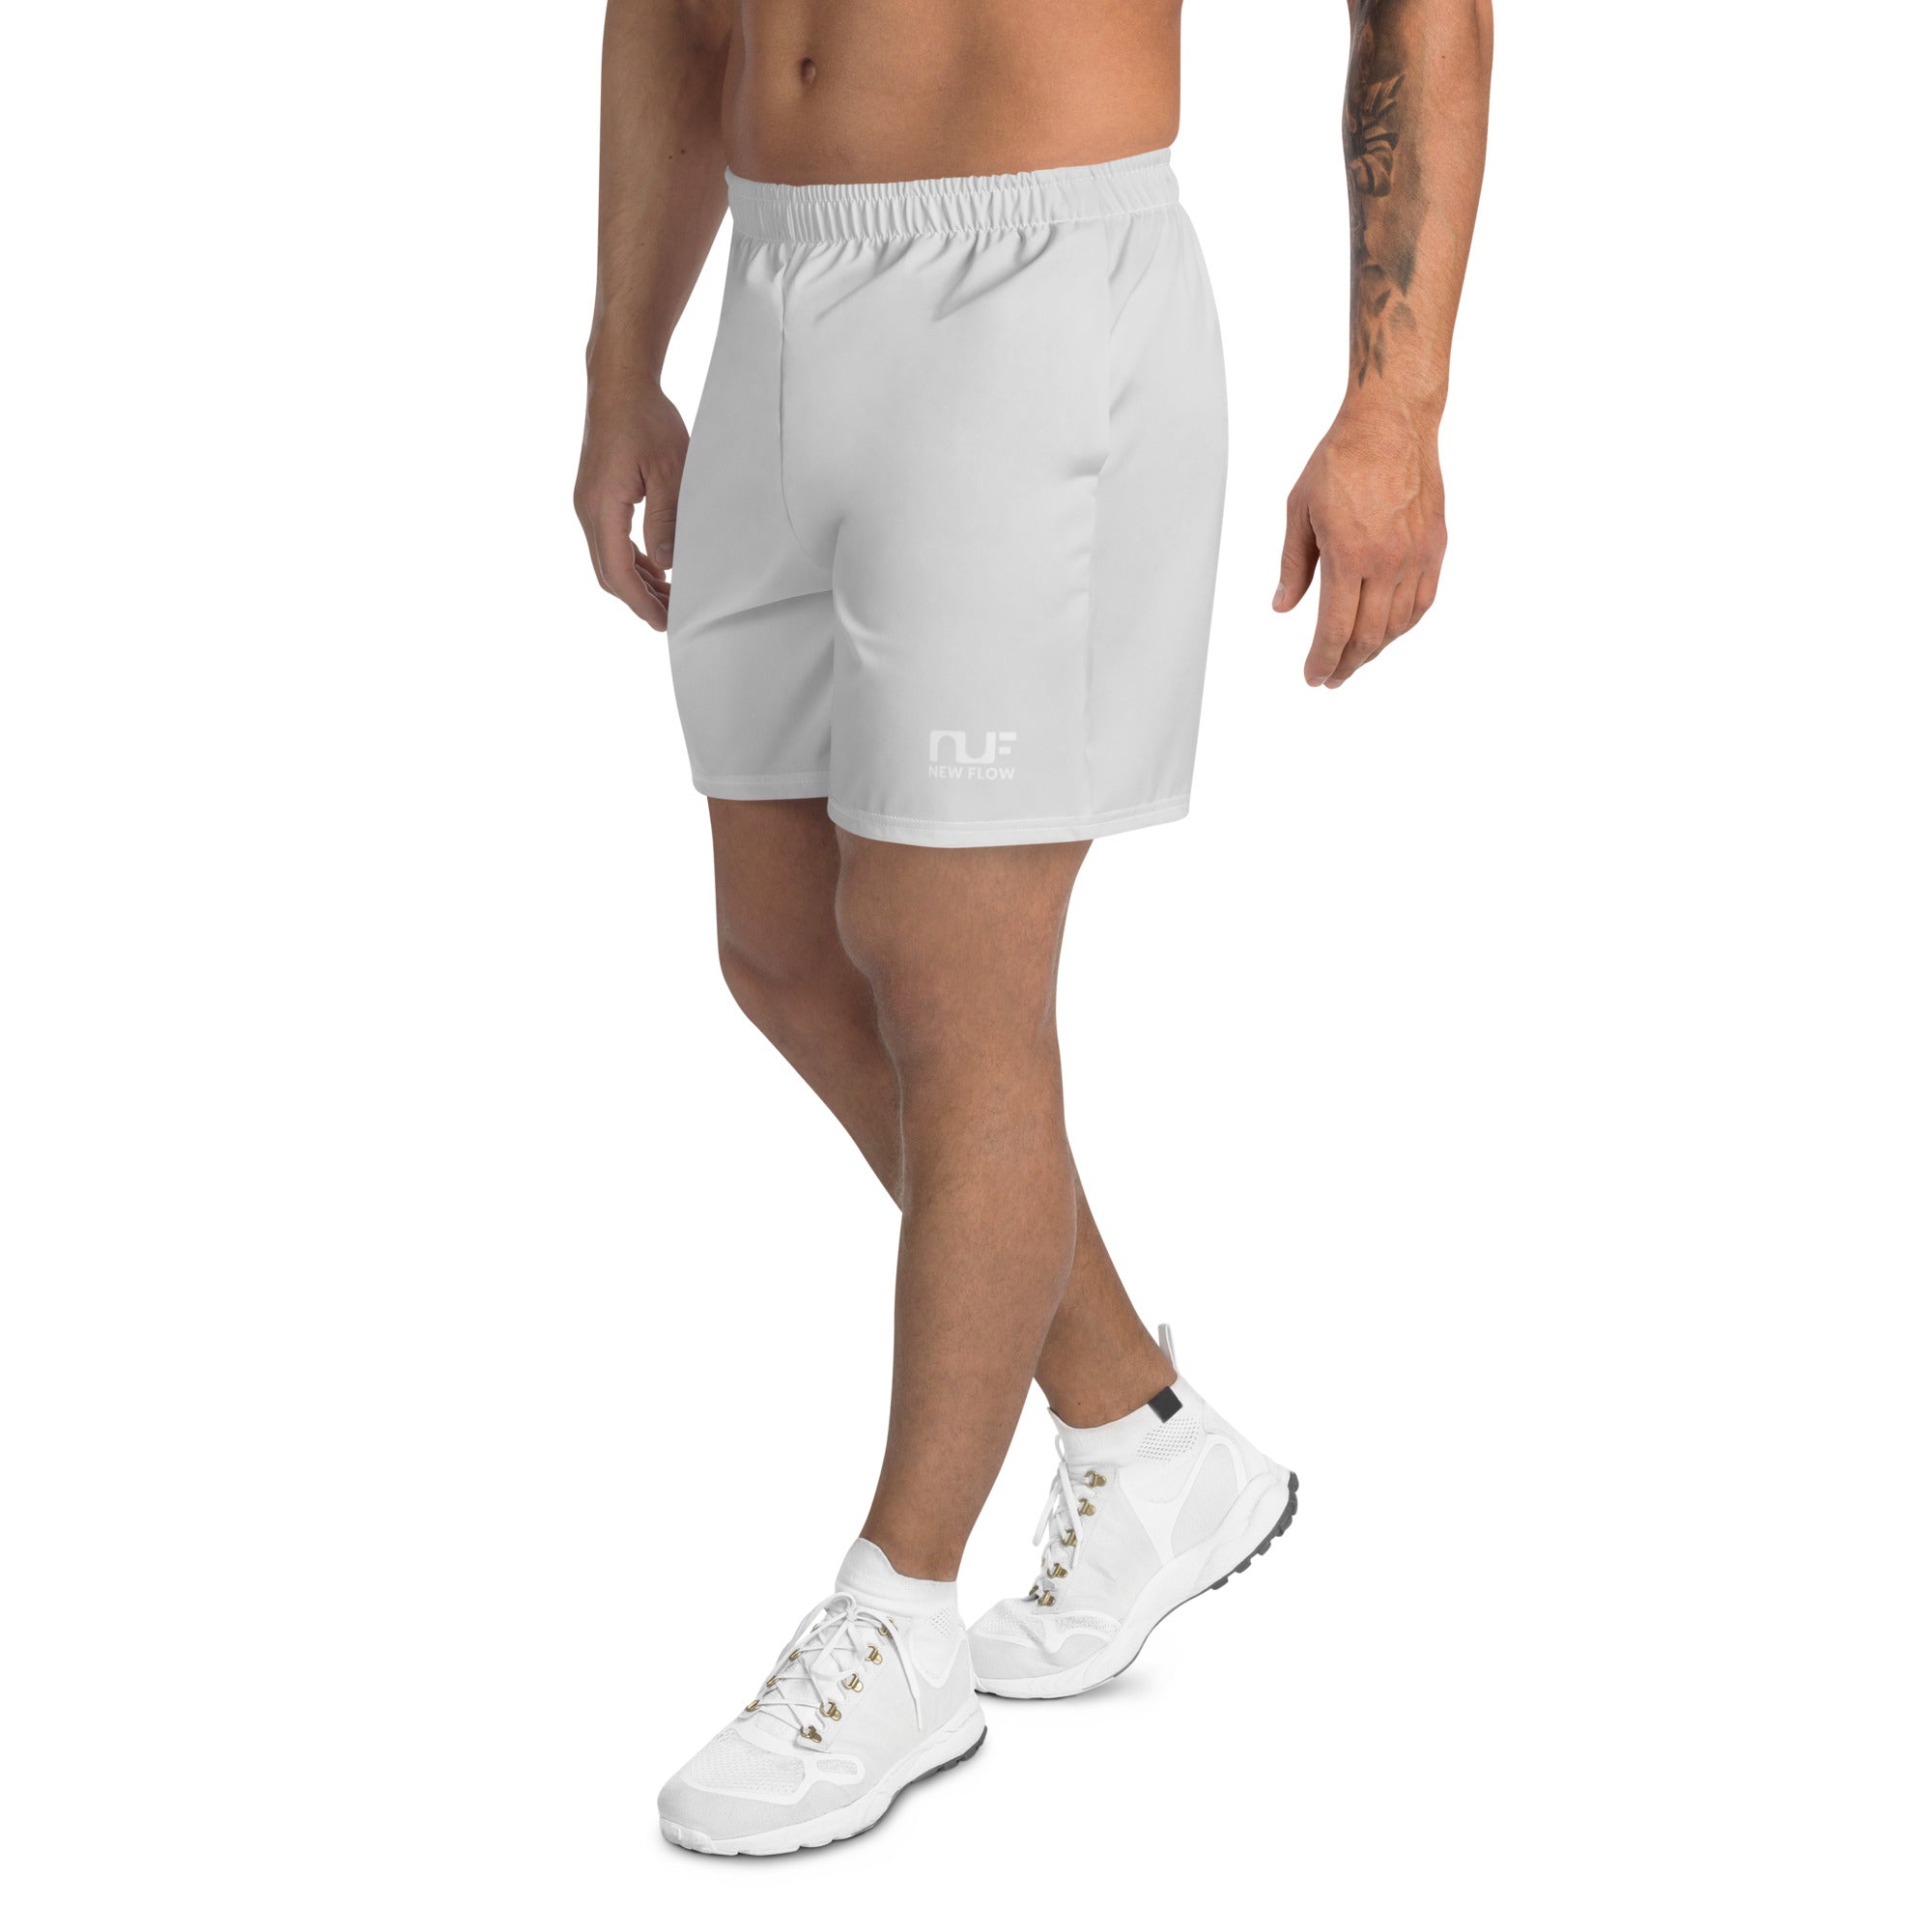 MEN'S RECYCLED ATHLETIC SHORTS – GREY